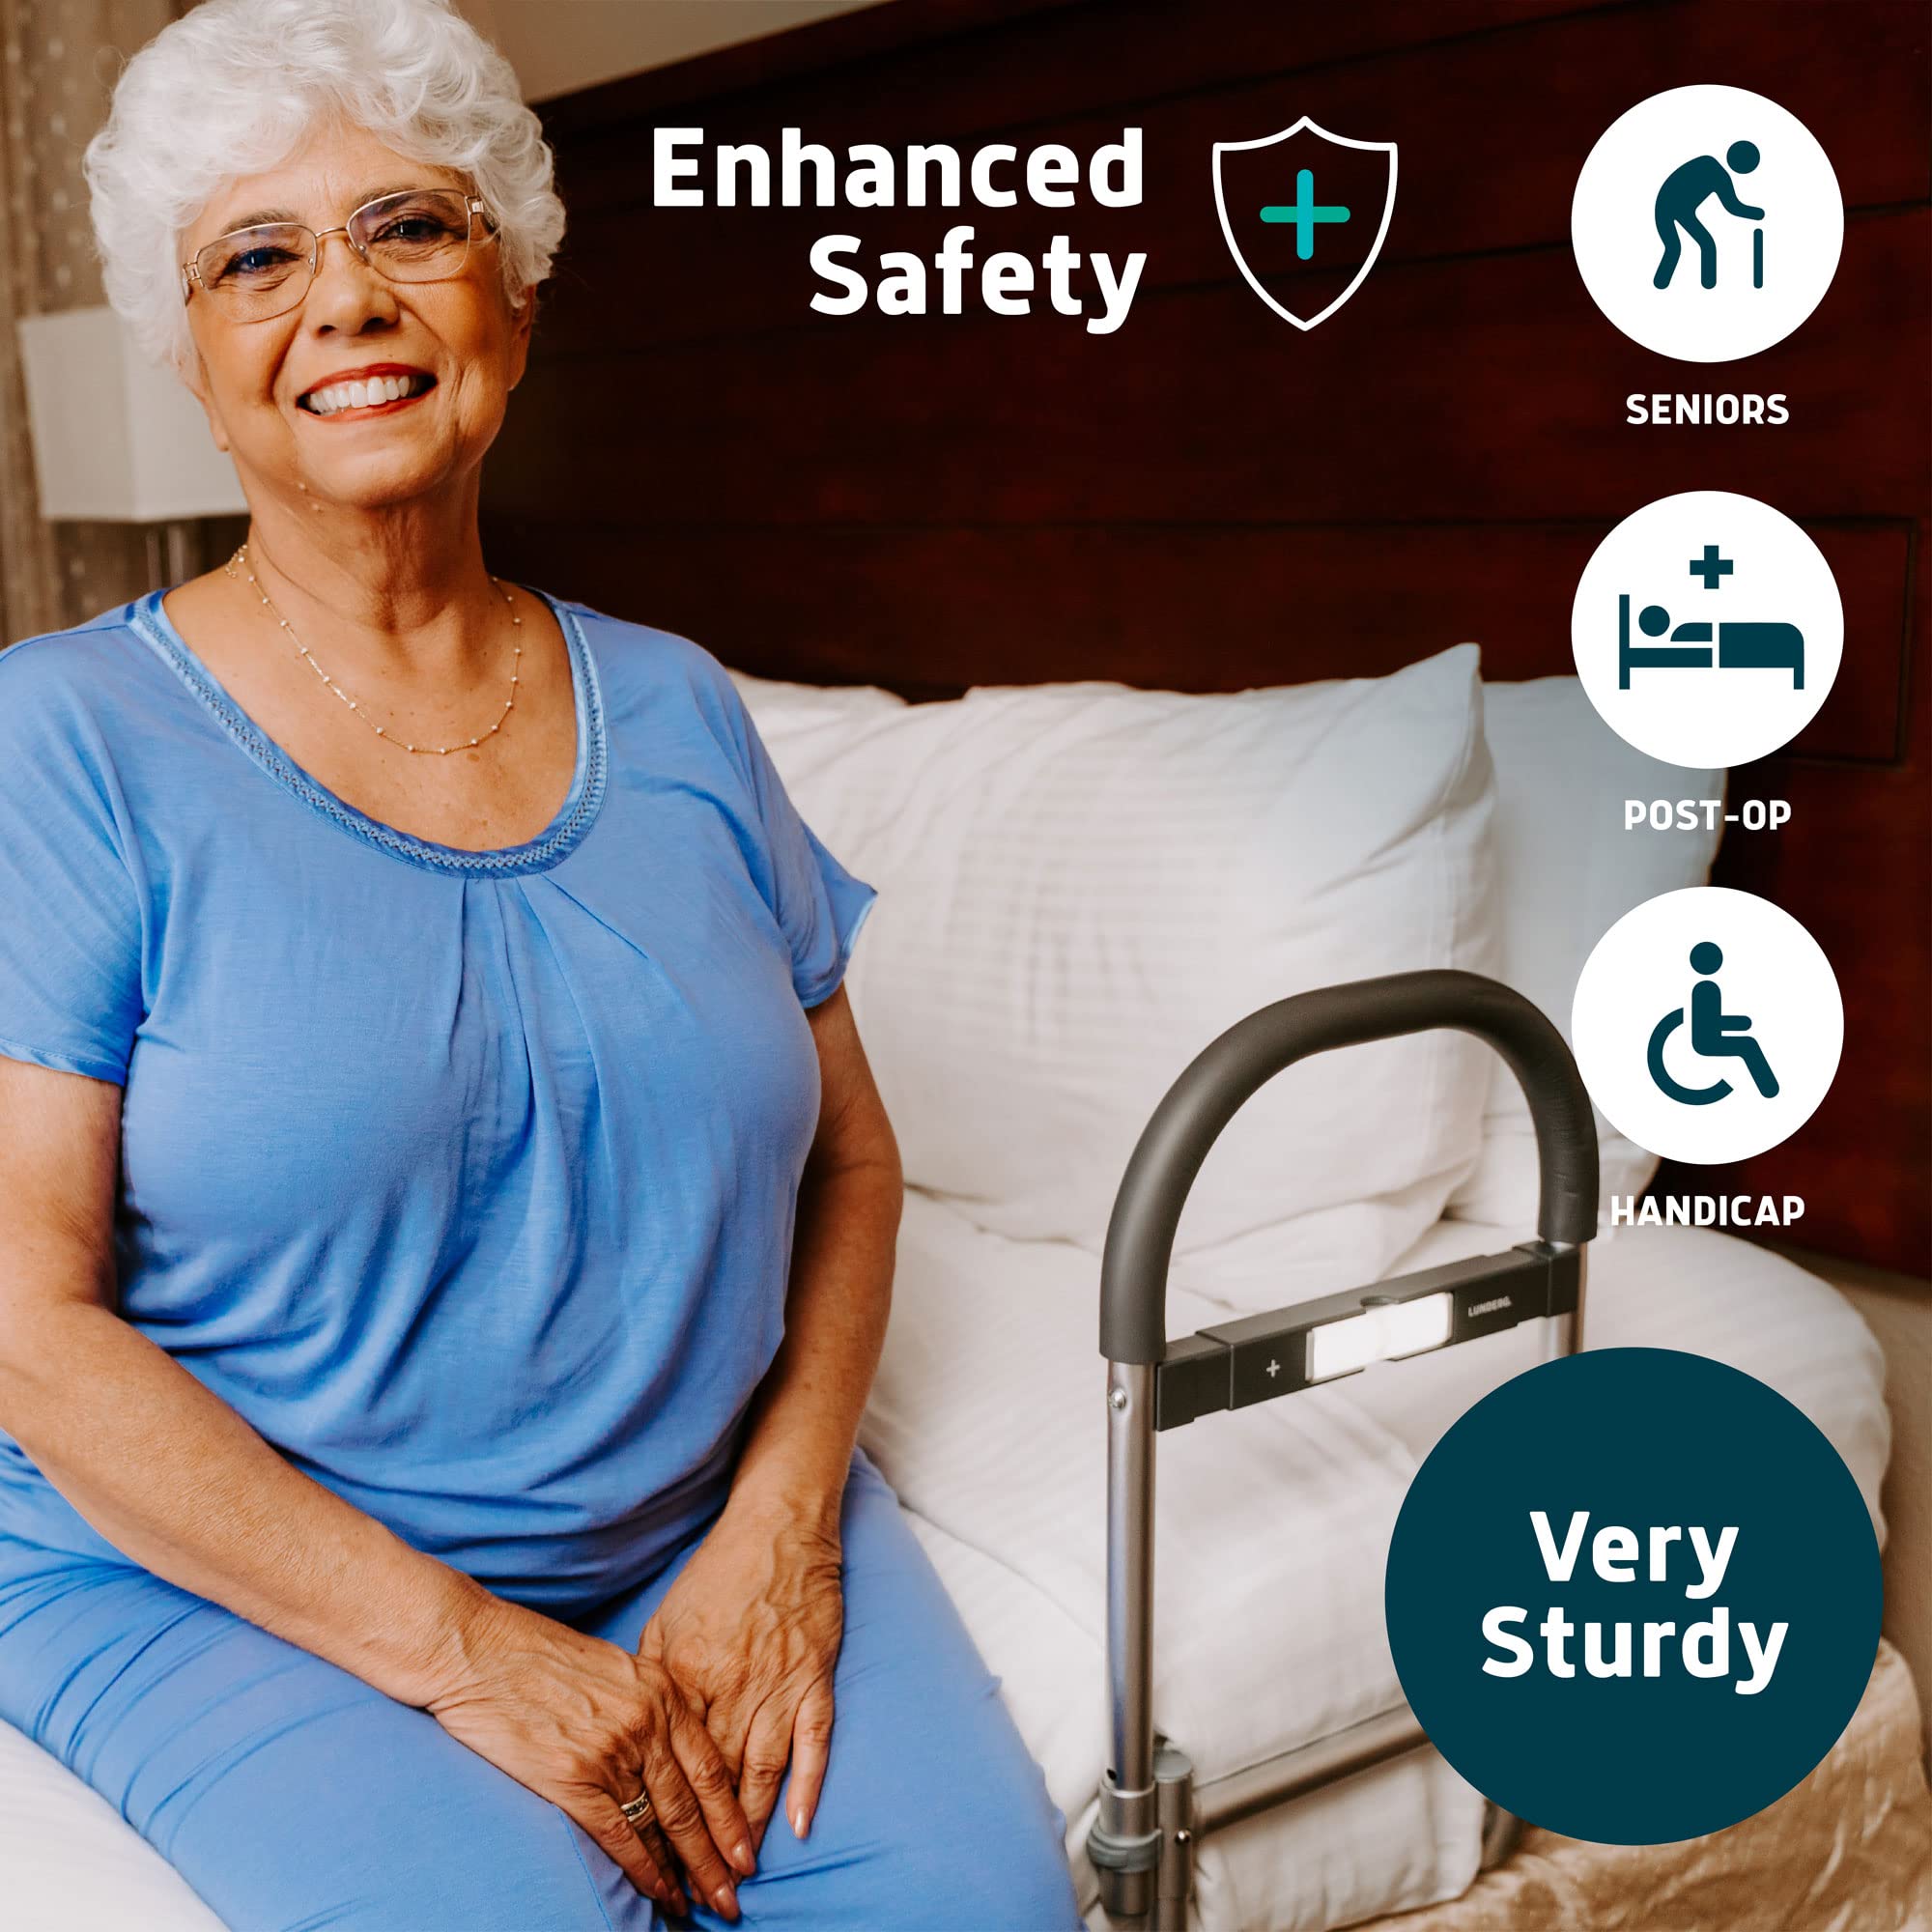 Lunderg Bed & Chair Alarm System & Bed Assist Rail with Motion Light & Non-Slip Handle for Elderly Adults Safety - Bed Alarms and Fall Prevention for Elderly and Dementia Patients